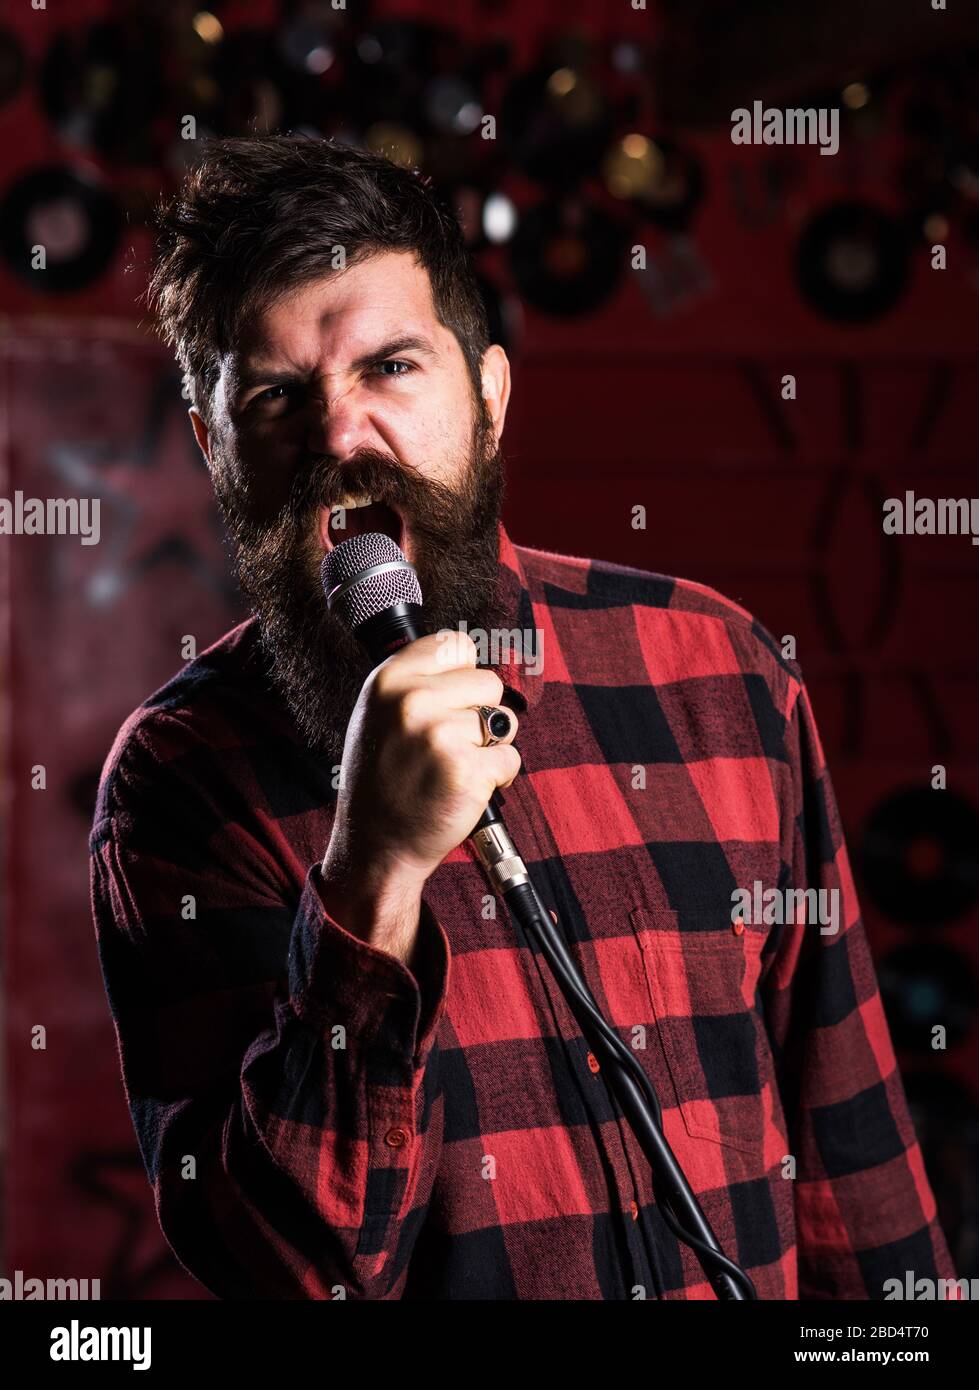 Man with enthusiastic face holds microphone, singing song, black background.  Musician with beard and mustache lighted by colorful spotlight. Singer  concept. Musician, singer singing in music hall Stock Photo - Alamy